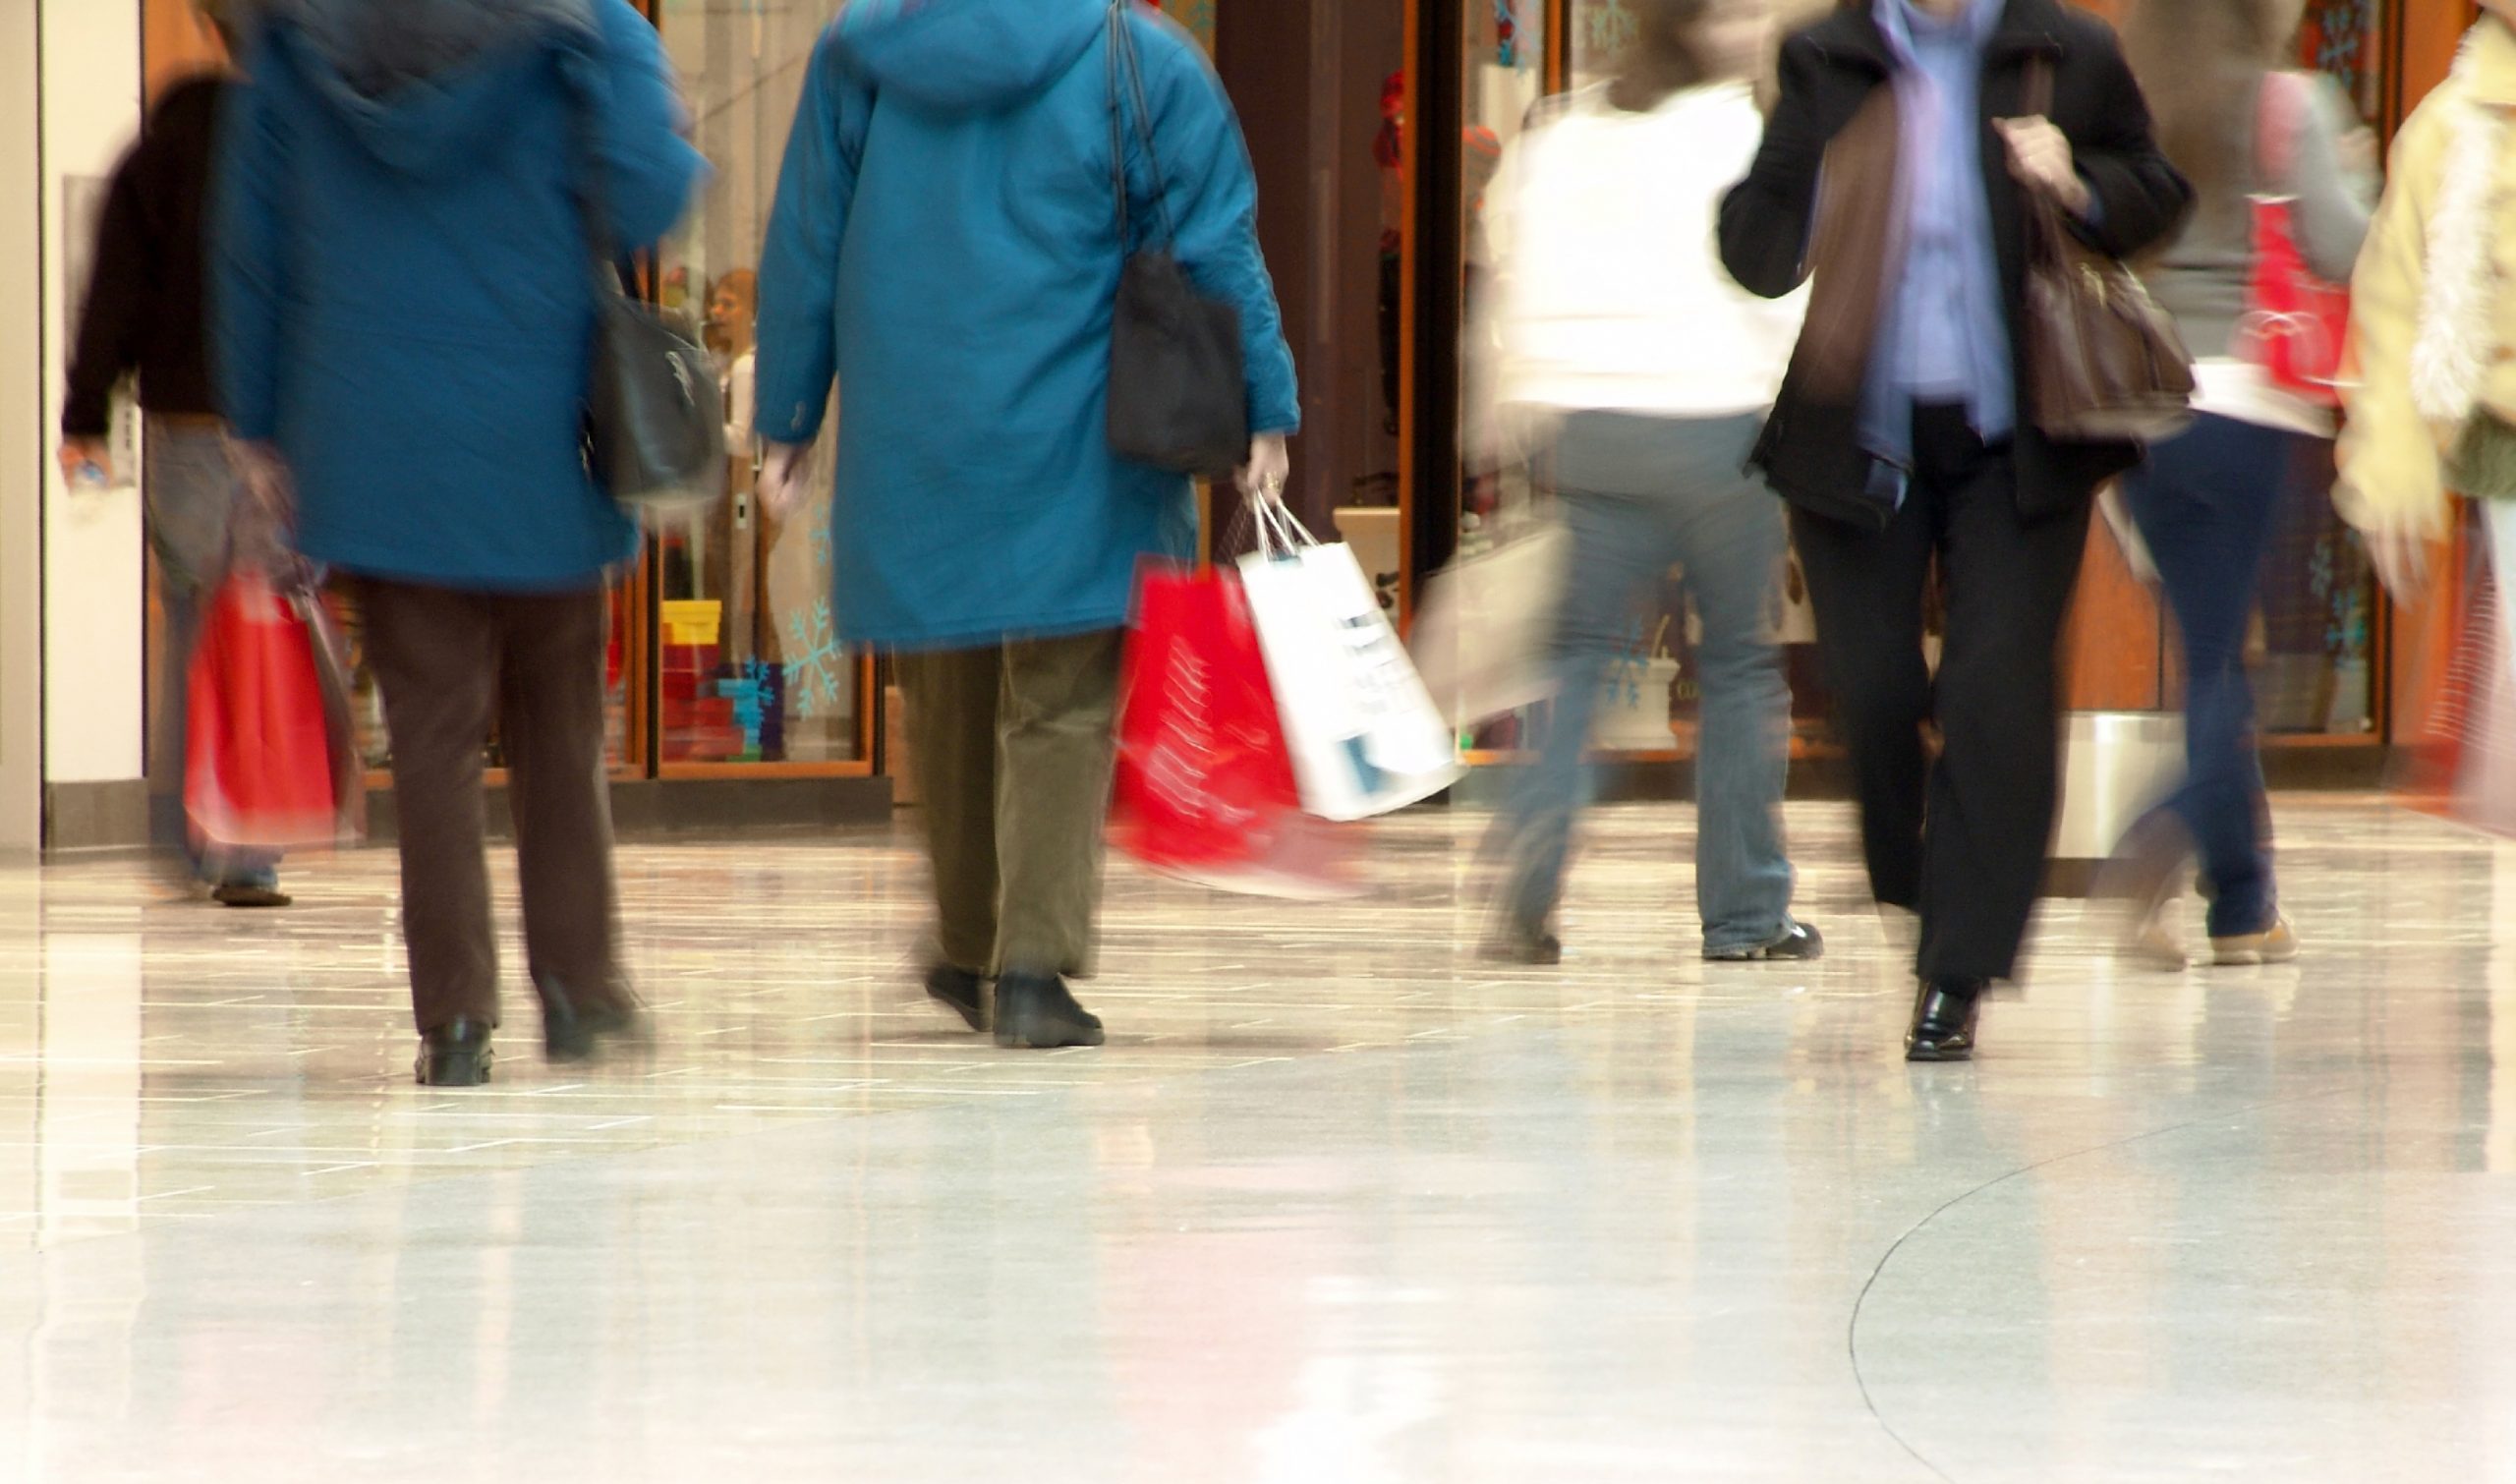 Post-Christmas footfall figures remain low compared to pre-pandemic levels